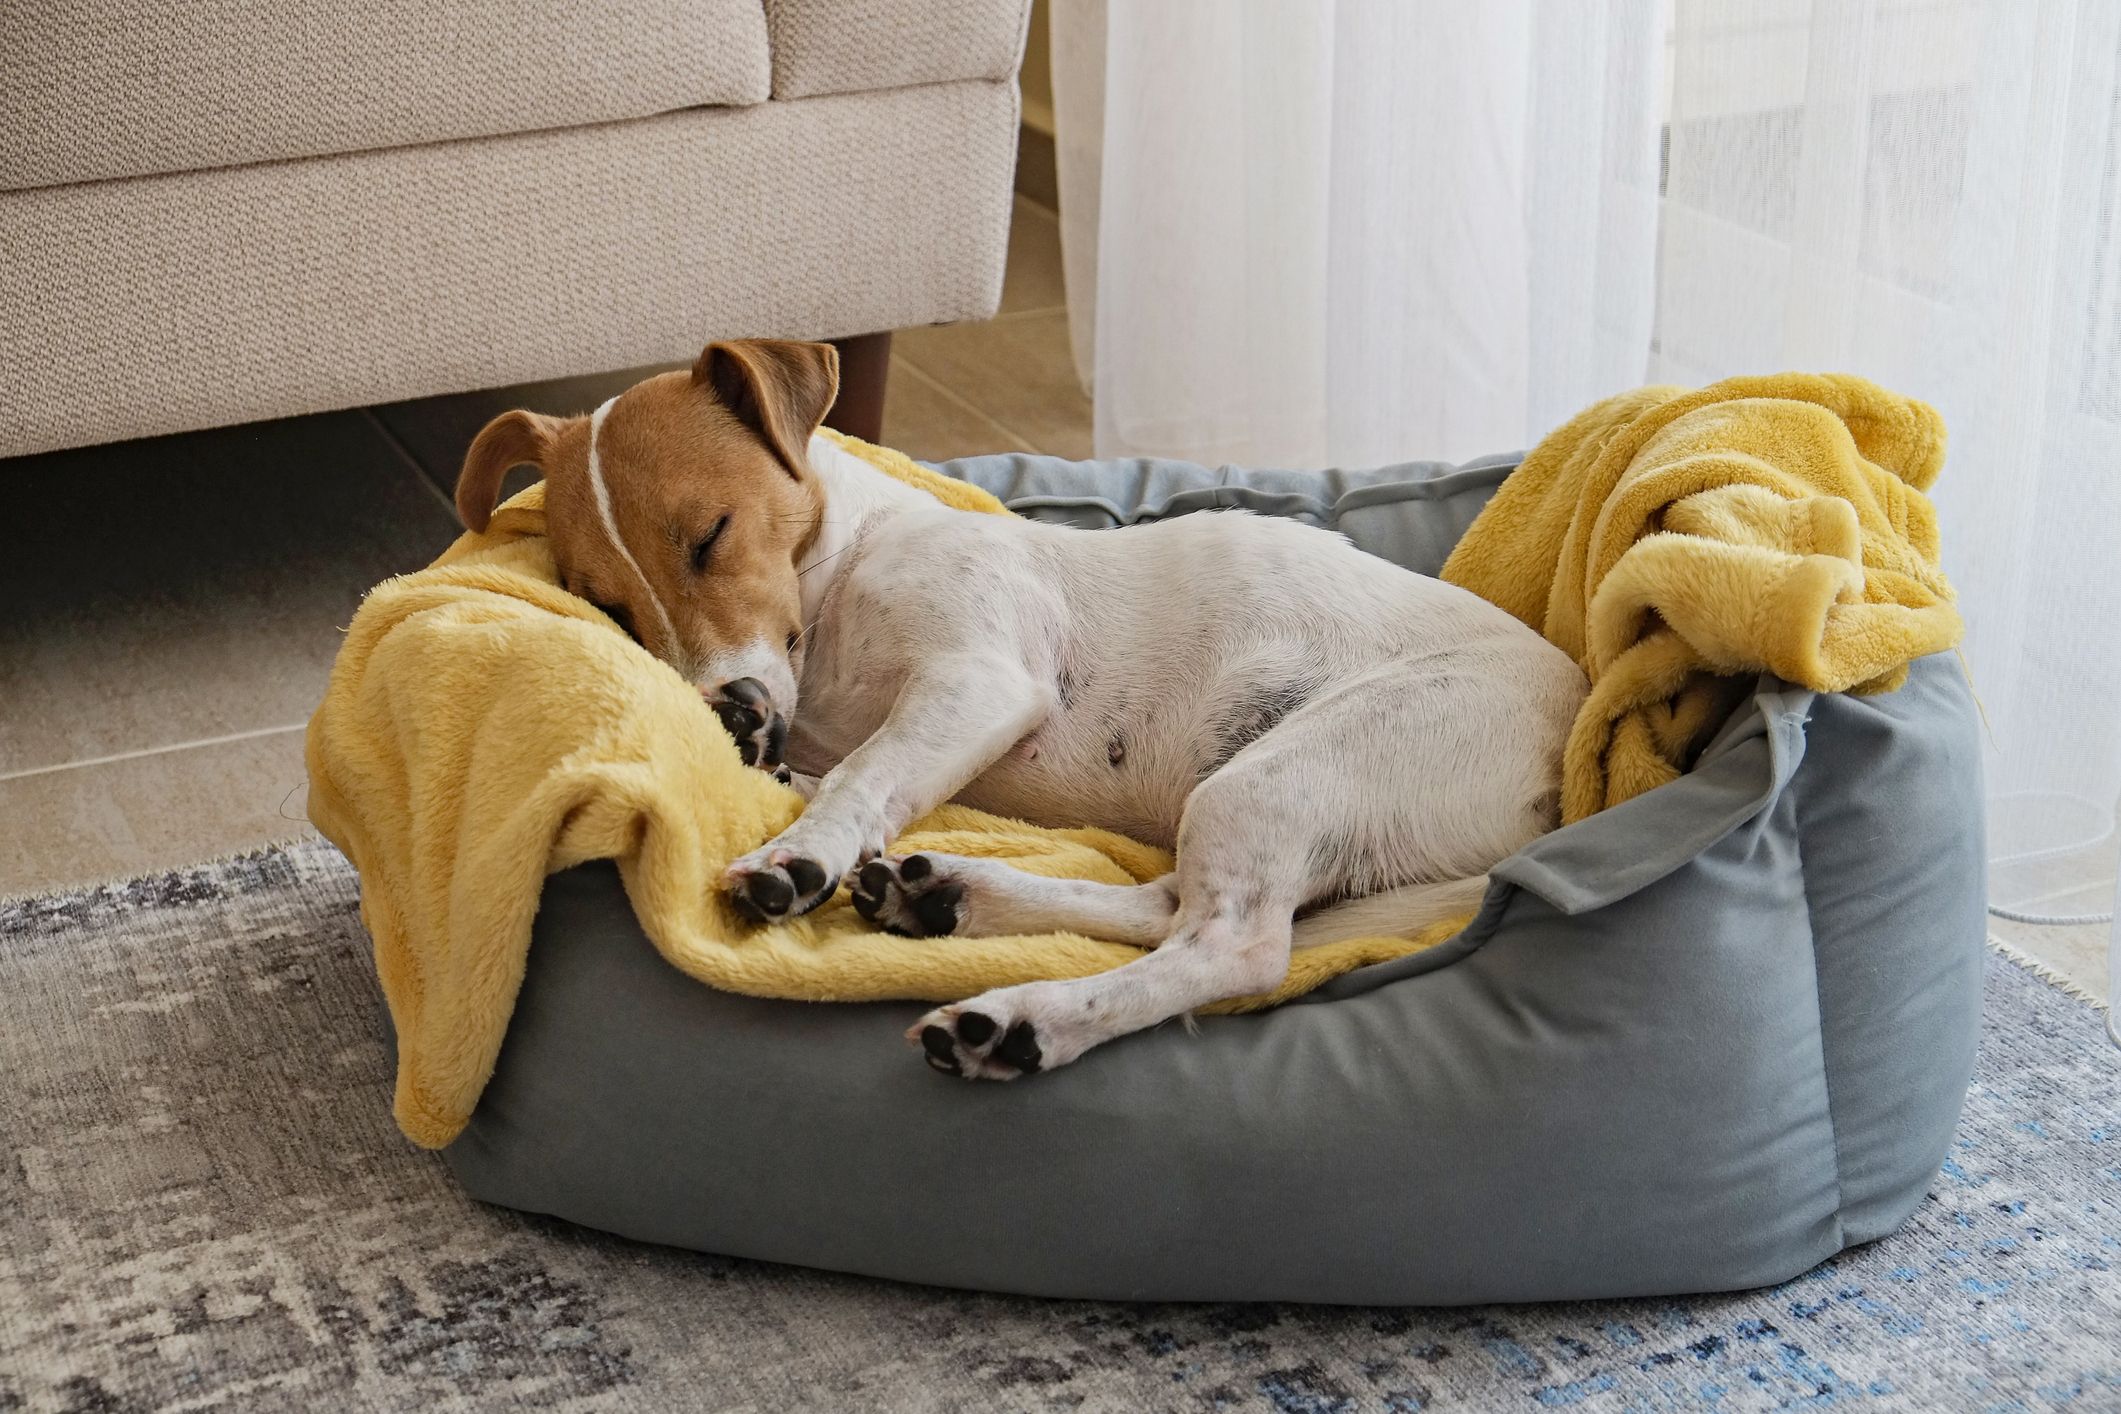 Why Is My Dog Twitching in His Sleep? - Whole Dog Journal